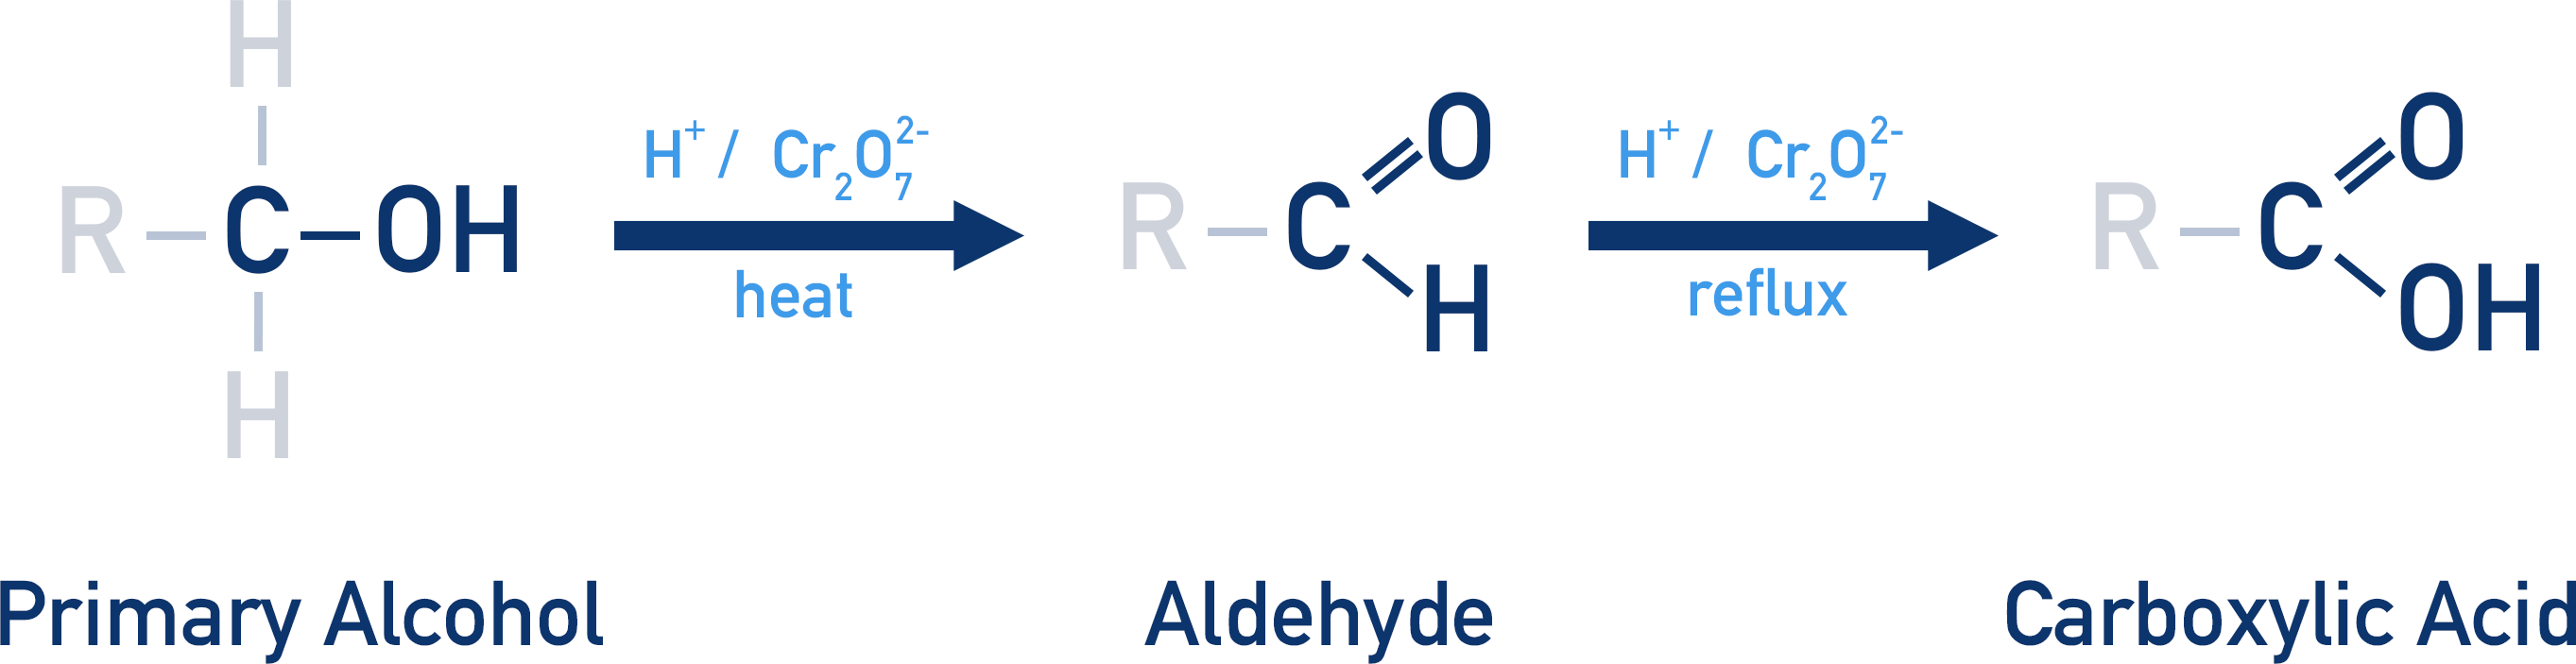 oxidation of primary alcohol to aldehyde and carboxylic acid